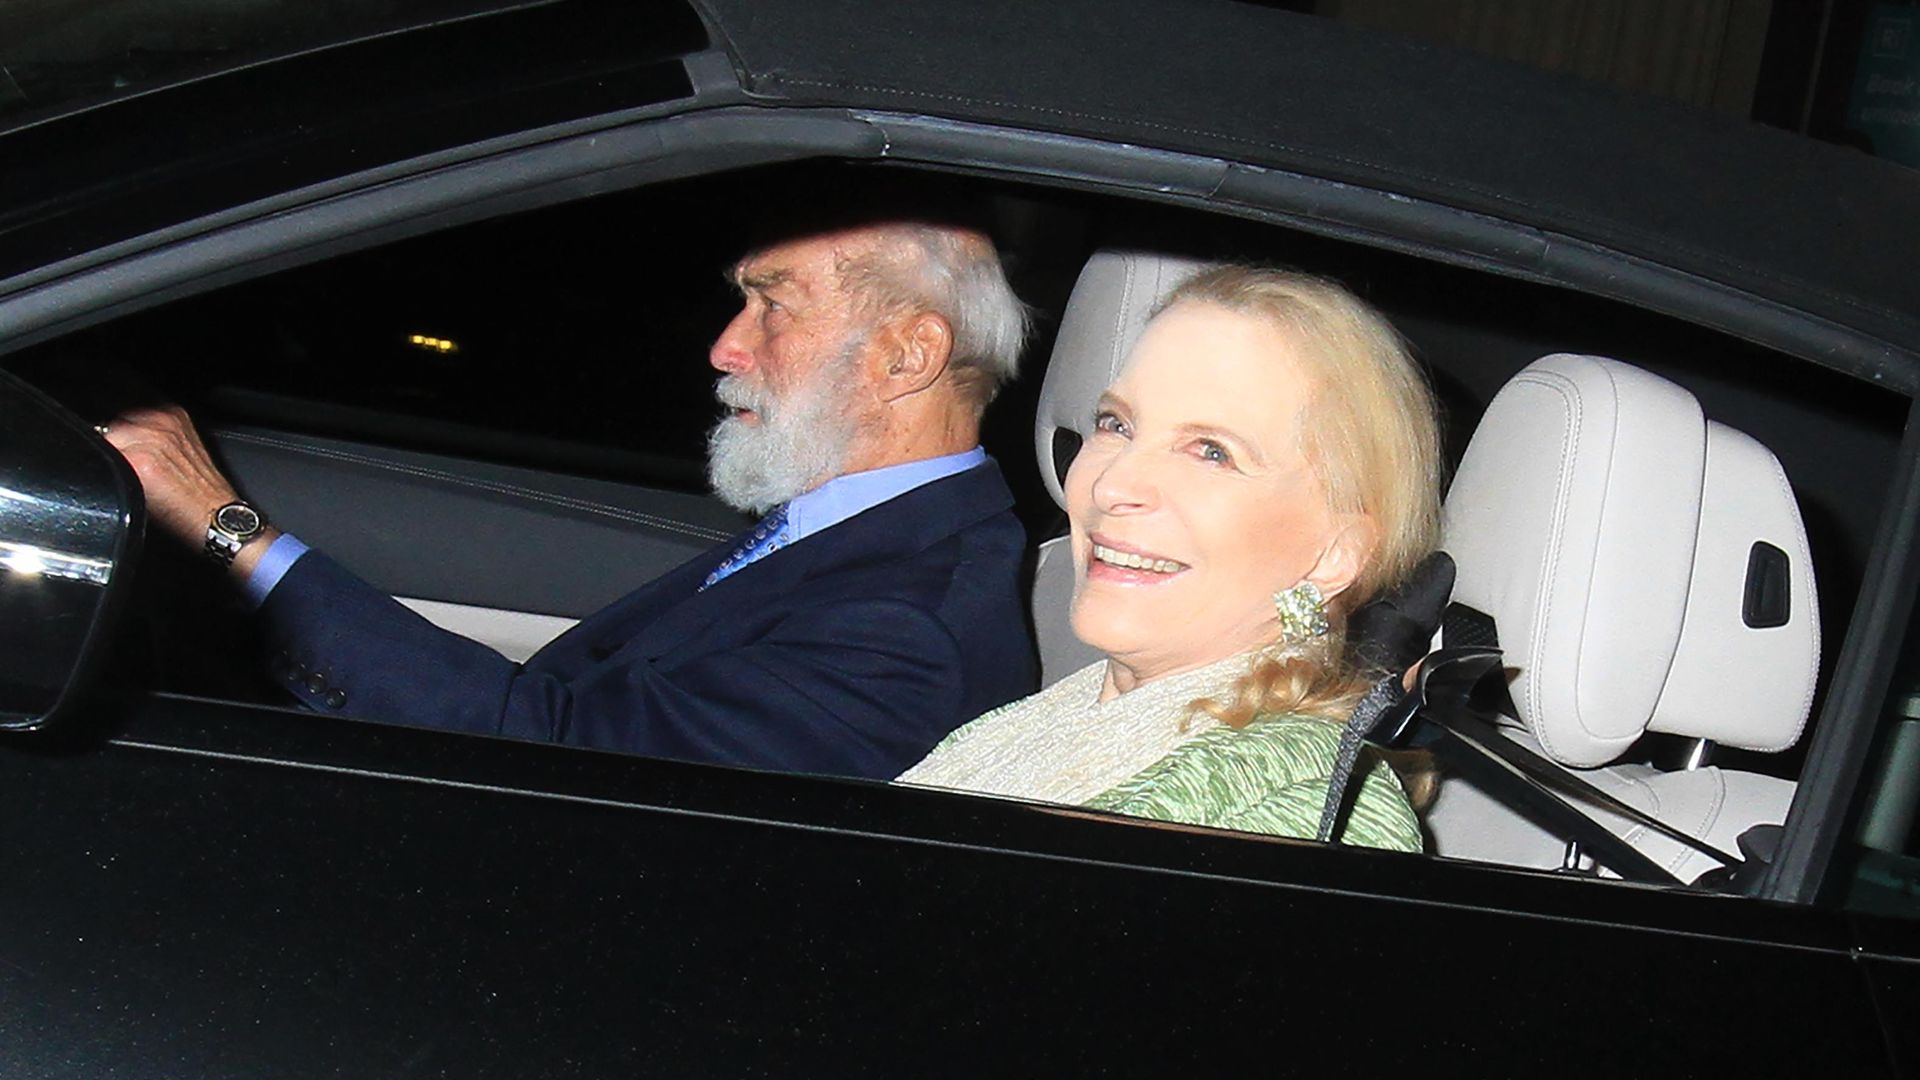 Prince and Princess Michael of Kent step out ahead of Lady Gabriella Kingston's birthday